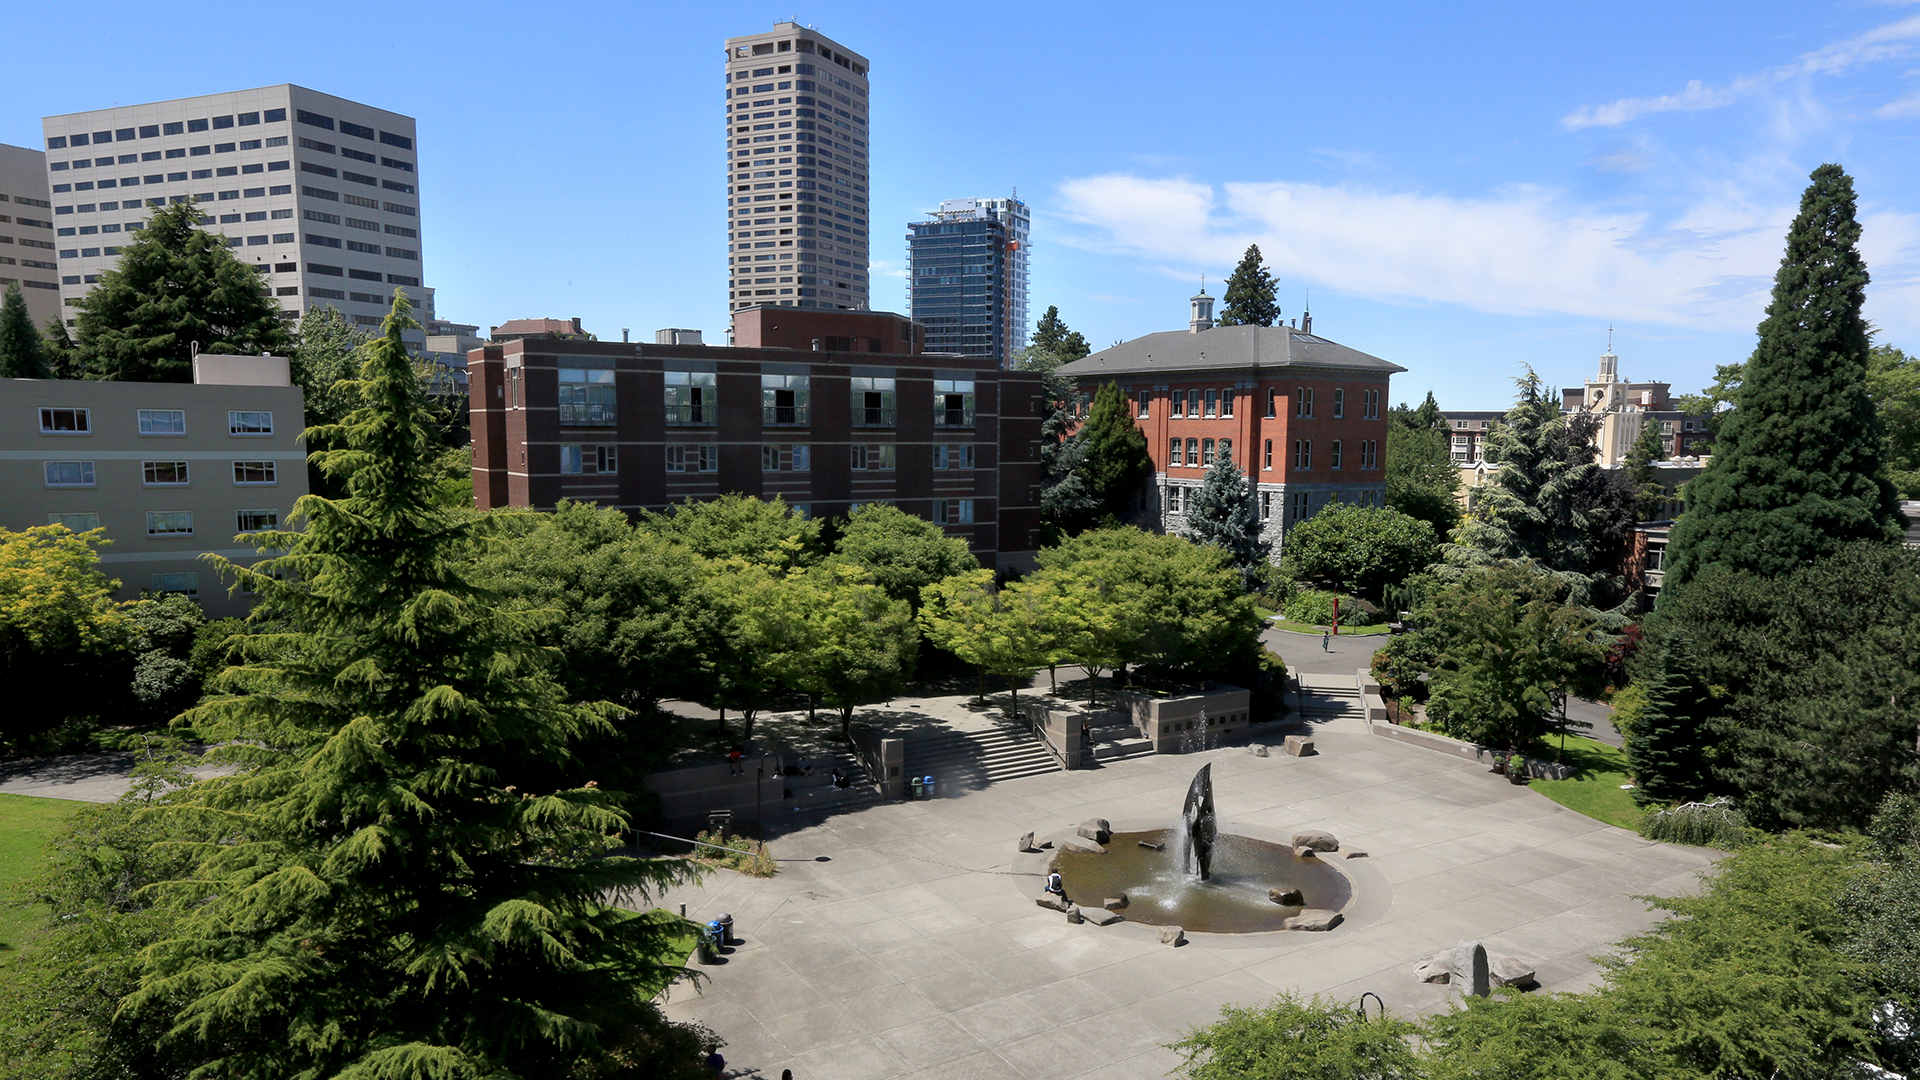 June 27th, 2016- A view of The Quad at Seattle University.